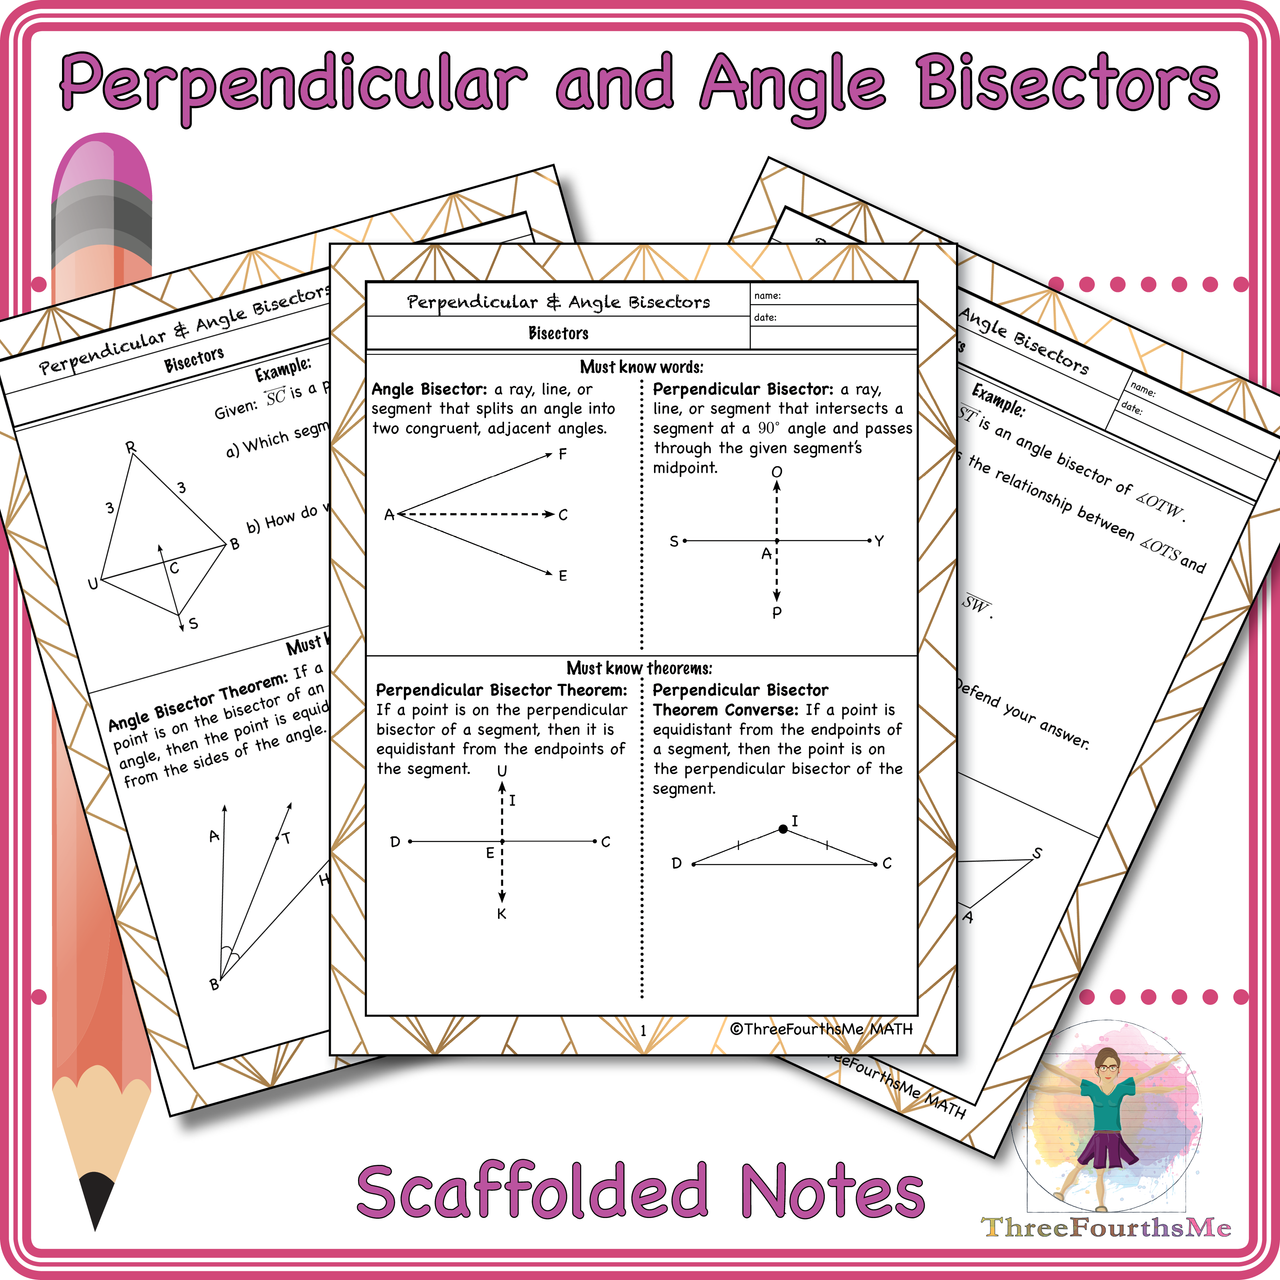 Perpendicular and Angle Bisectors Scaffolded Notes - Amped Up Learning